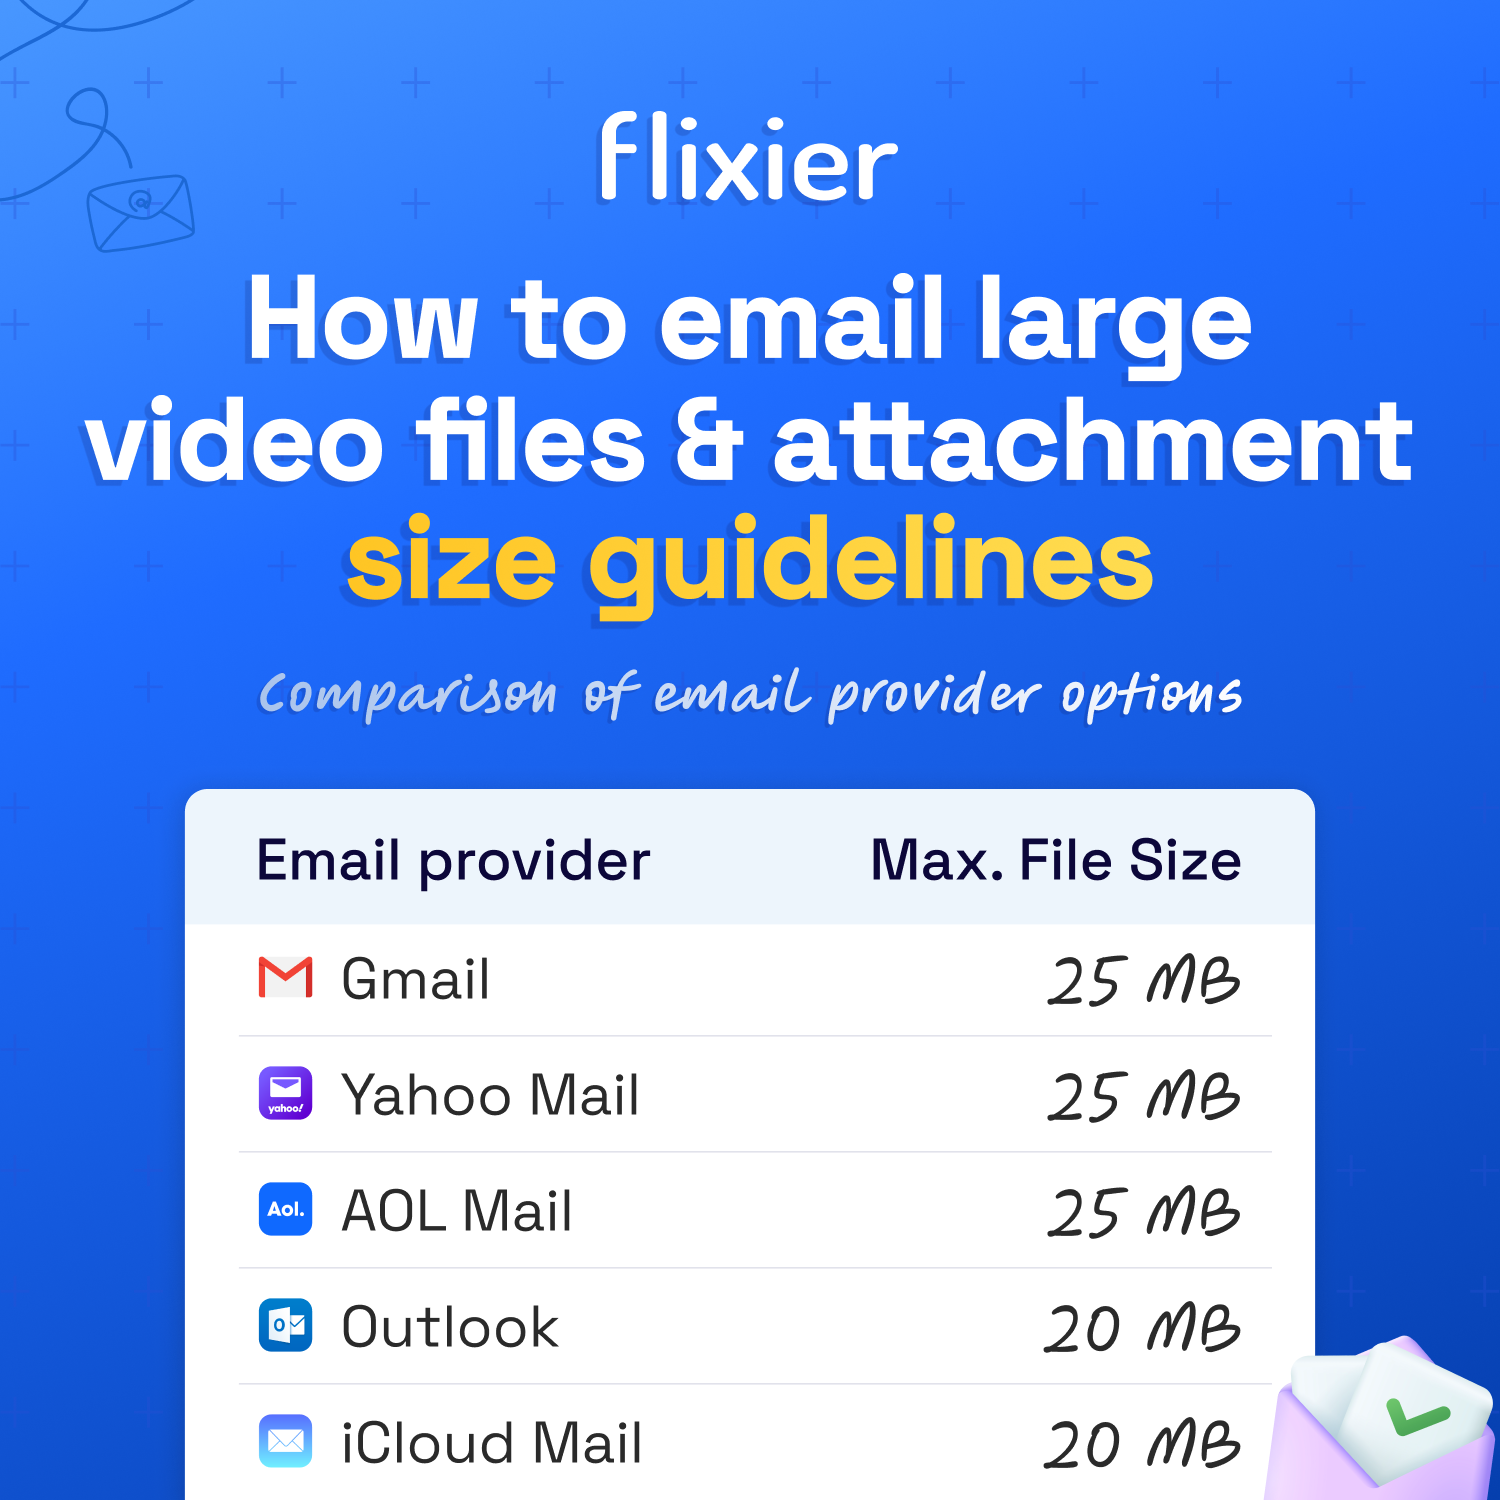 Visual comparison of email provider options Gmail, Yahoo Mail, AOL Mail, Outlook, and iCloud Mail maximum accepted sized for attachments guideline on how to email large video files.